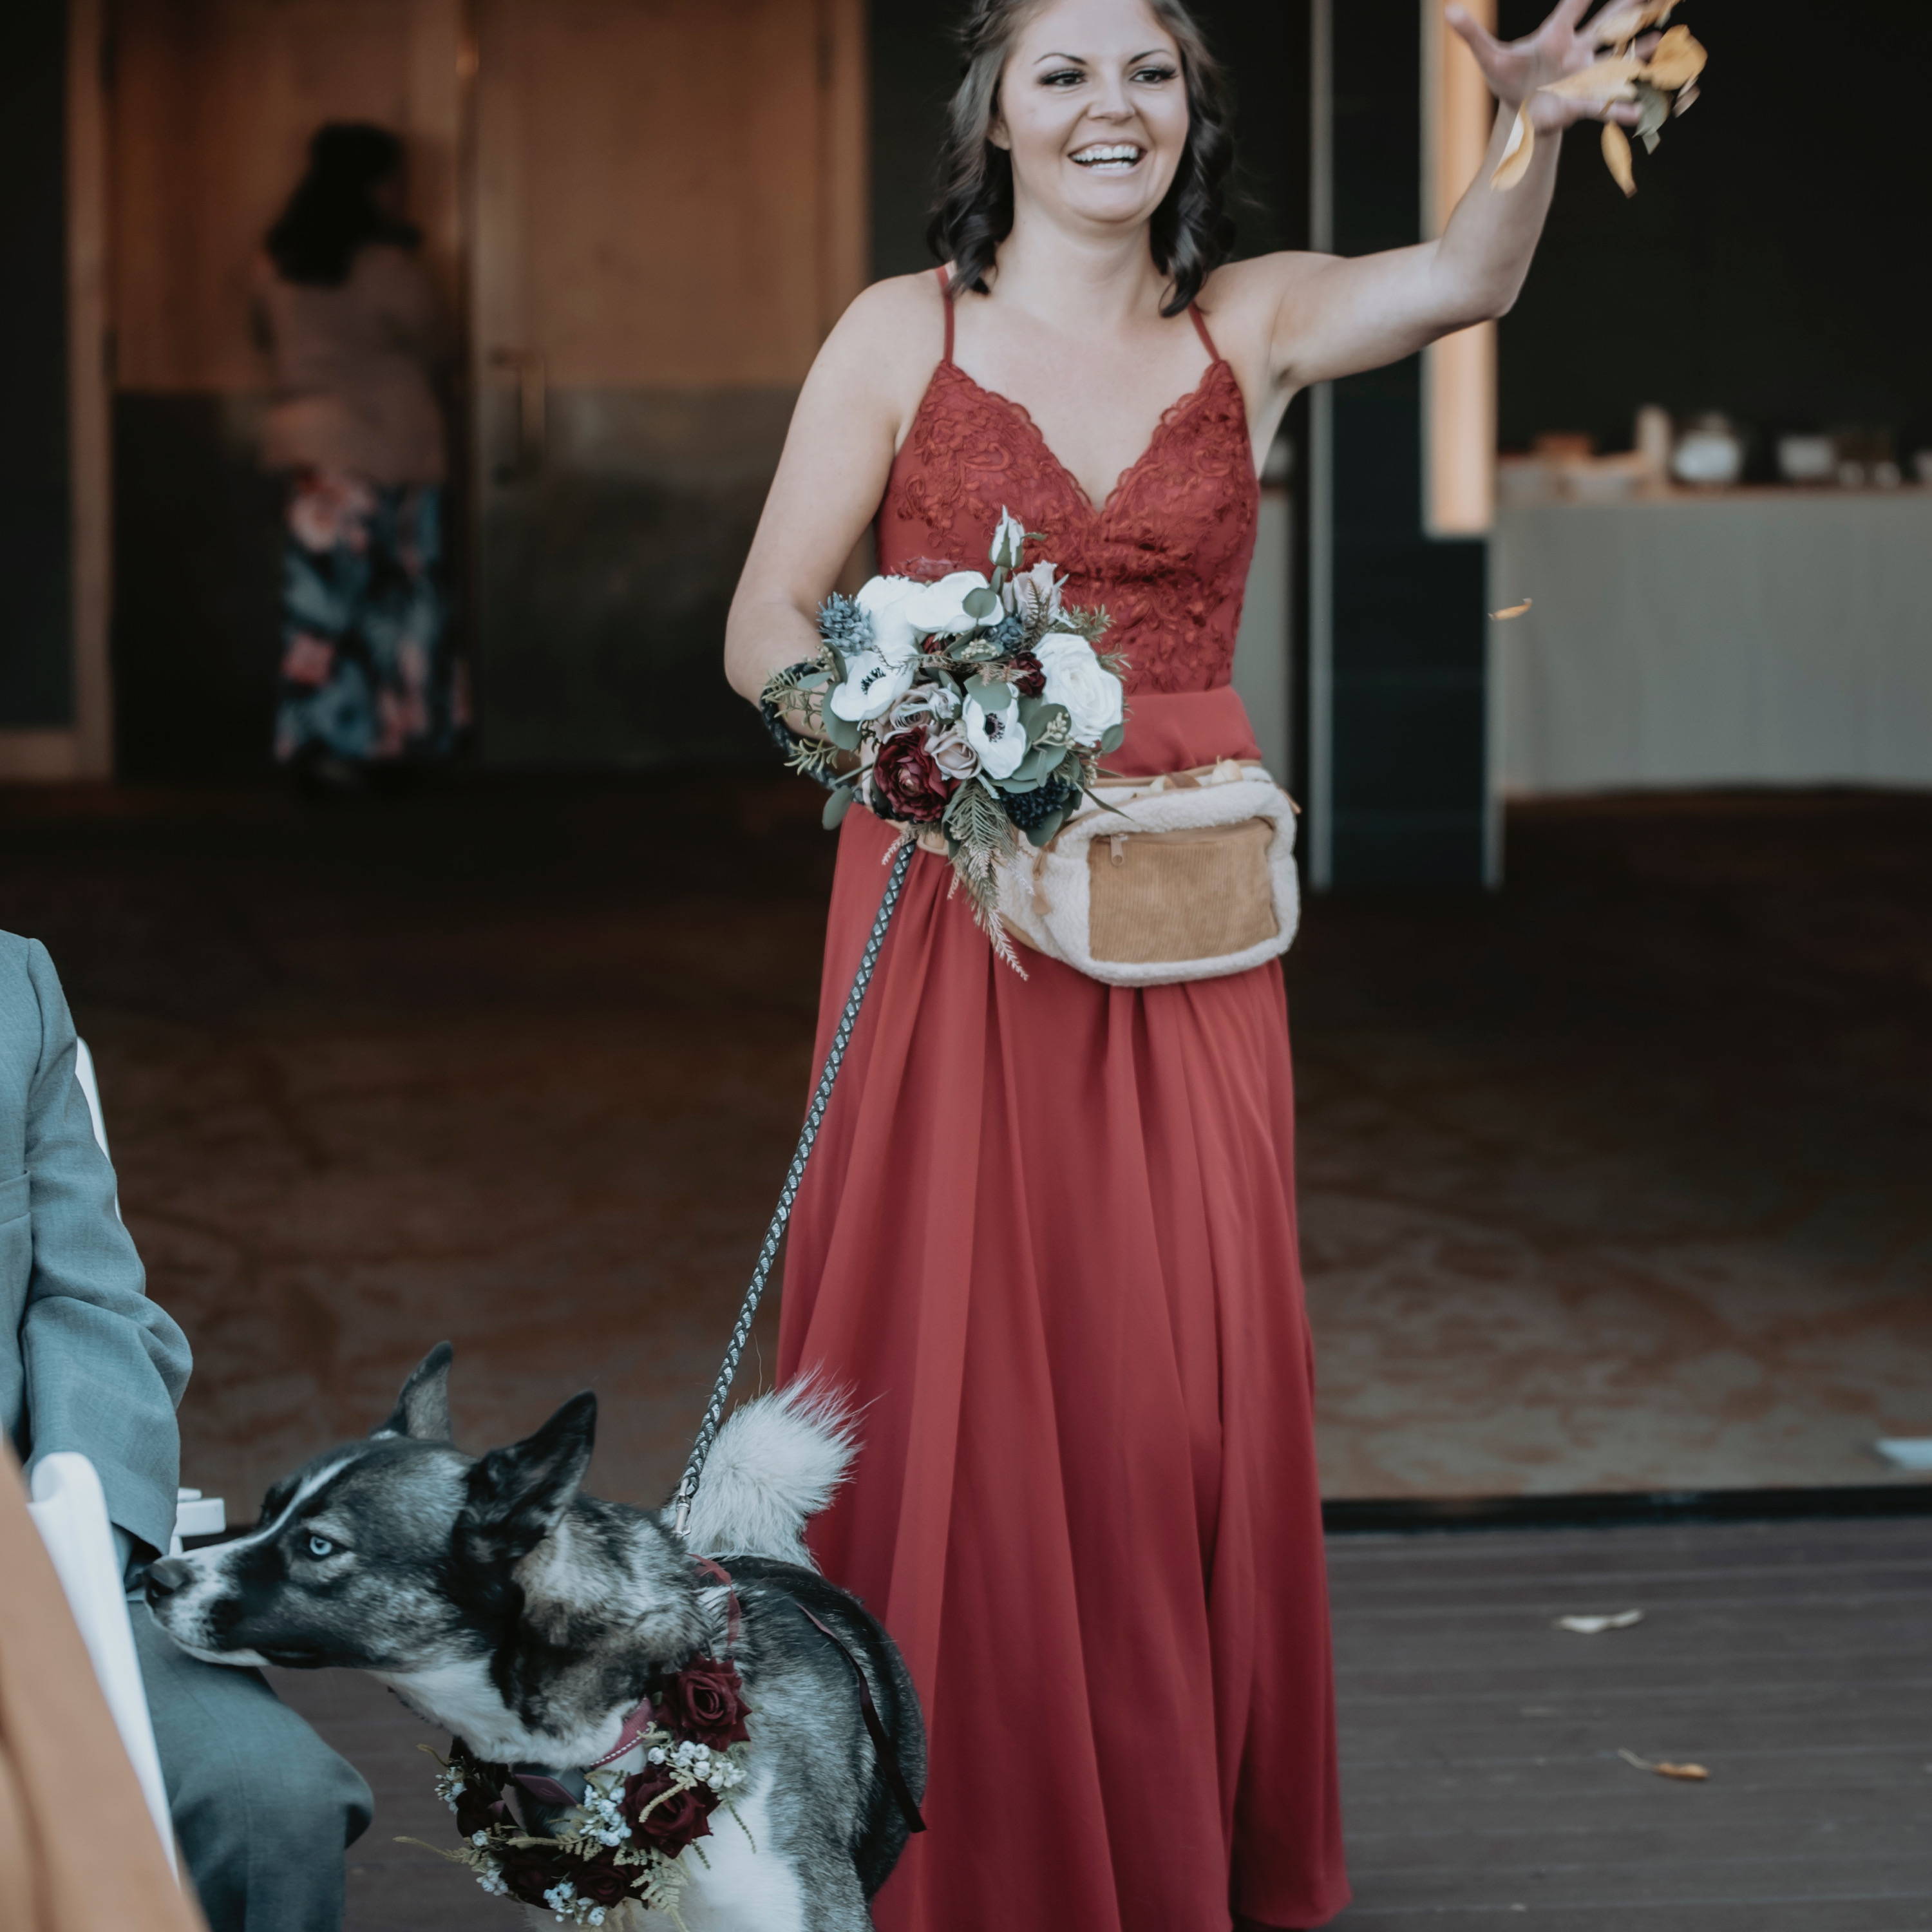 A bridesmaid wearing a terracotta dress sprinkles rose petals while walking a dog wearing a floral collar down the aisle for a wedding ceremony 